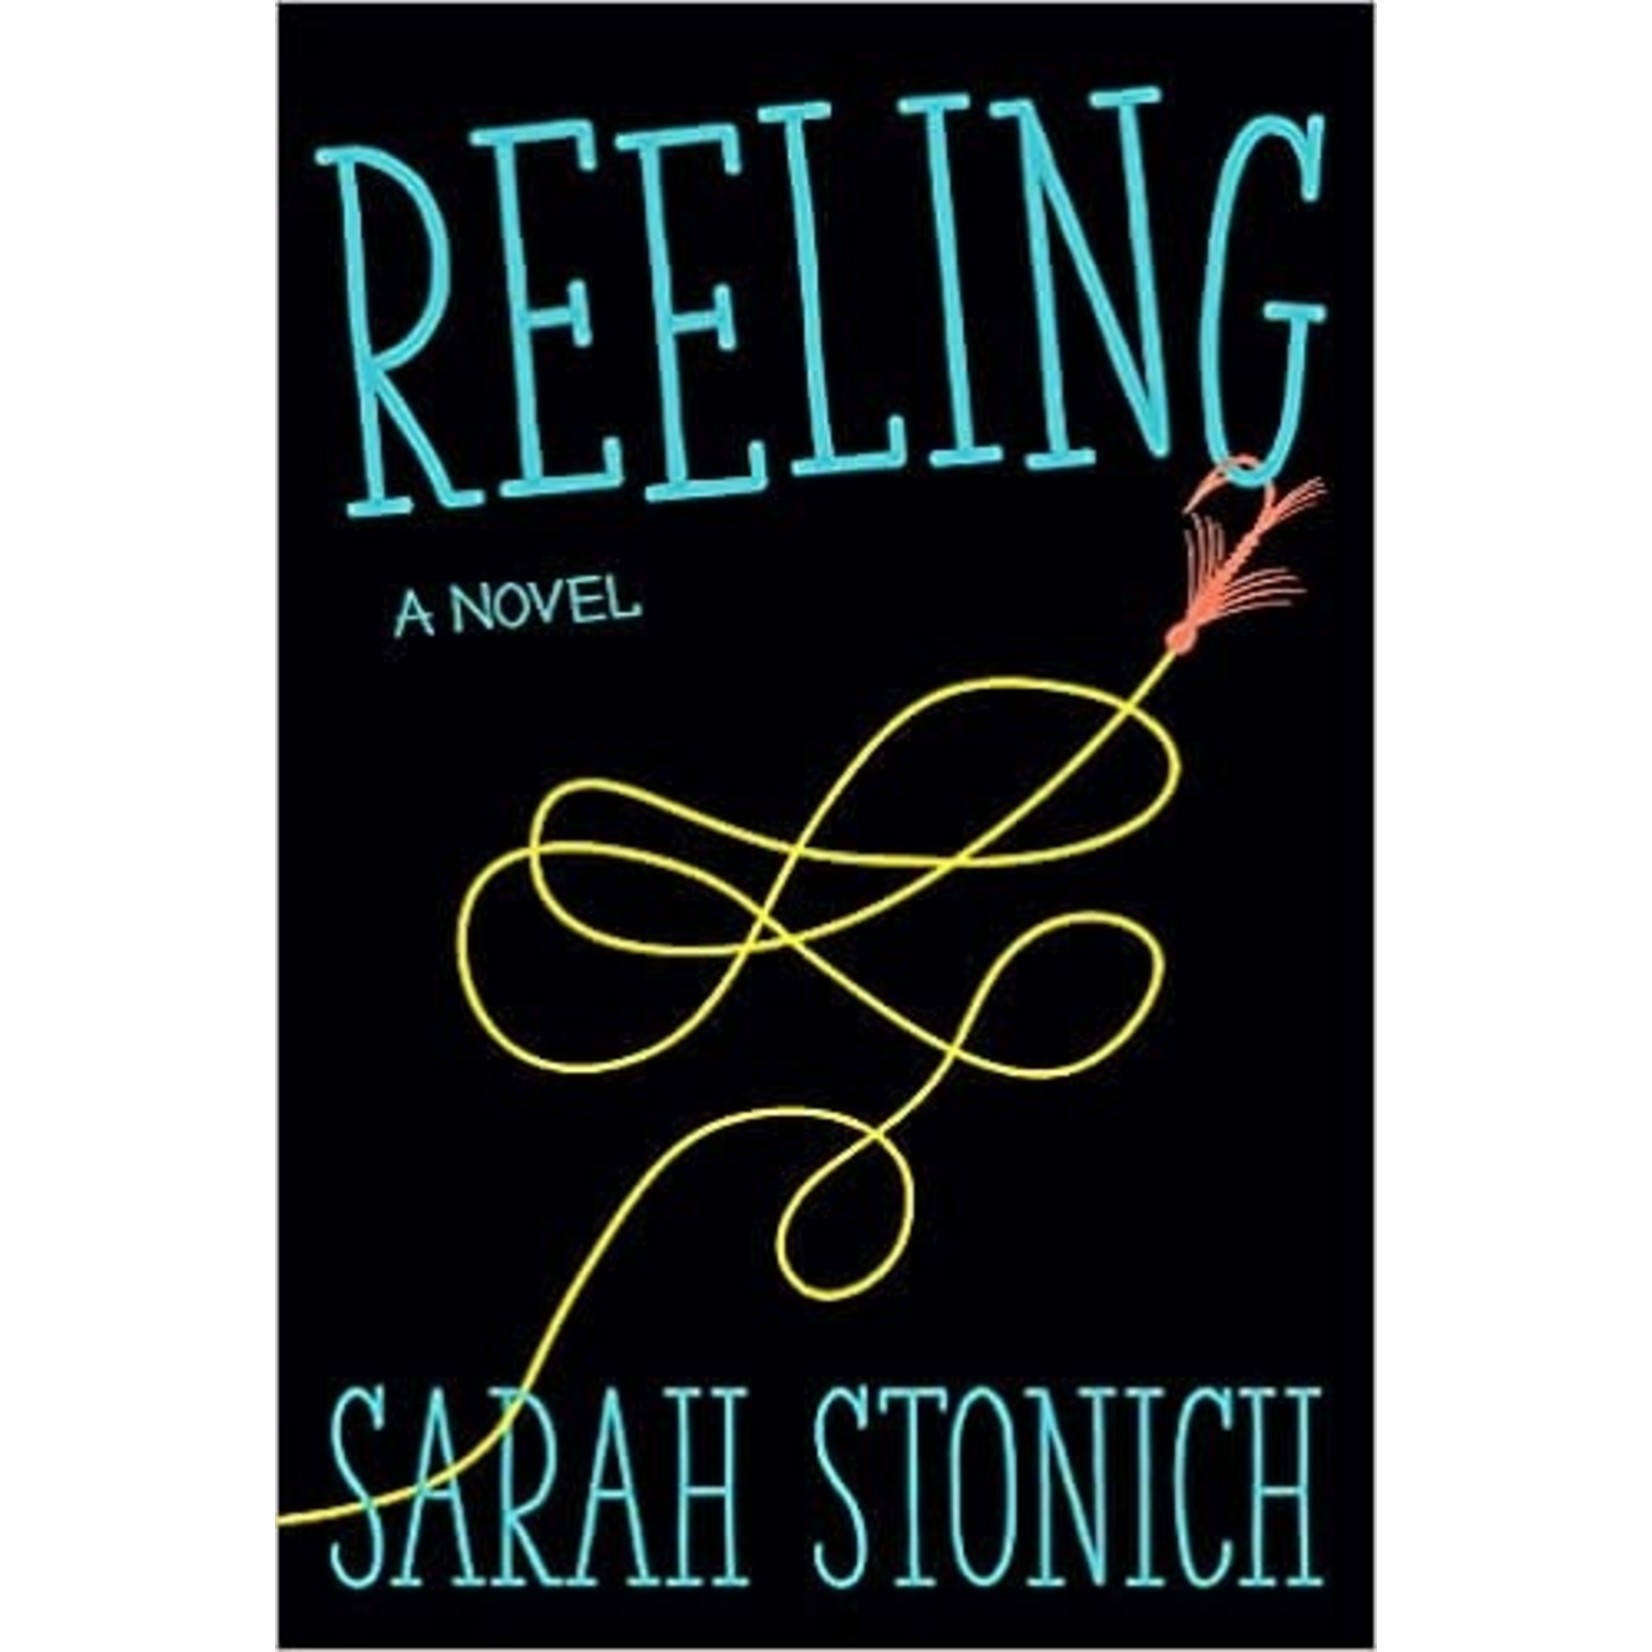 Reeling by Sarah Stonich